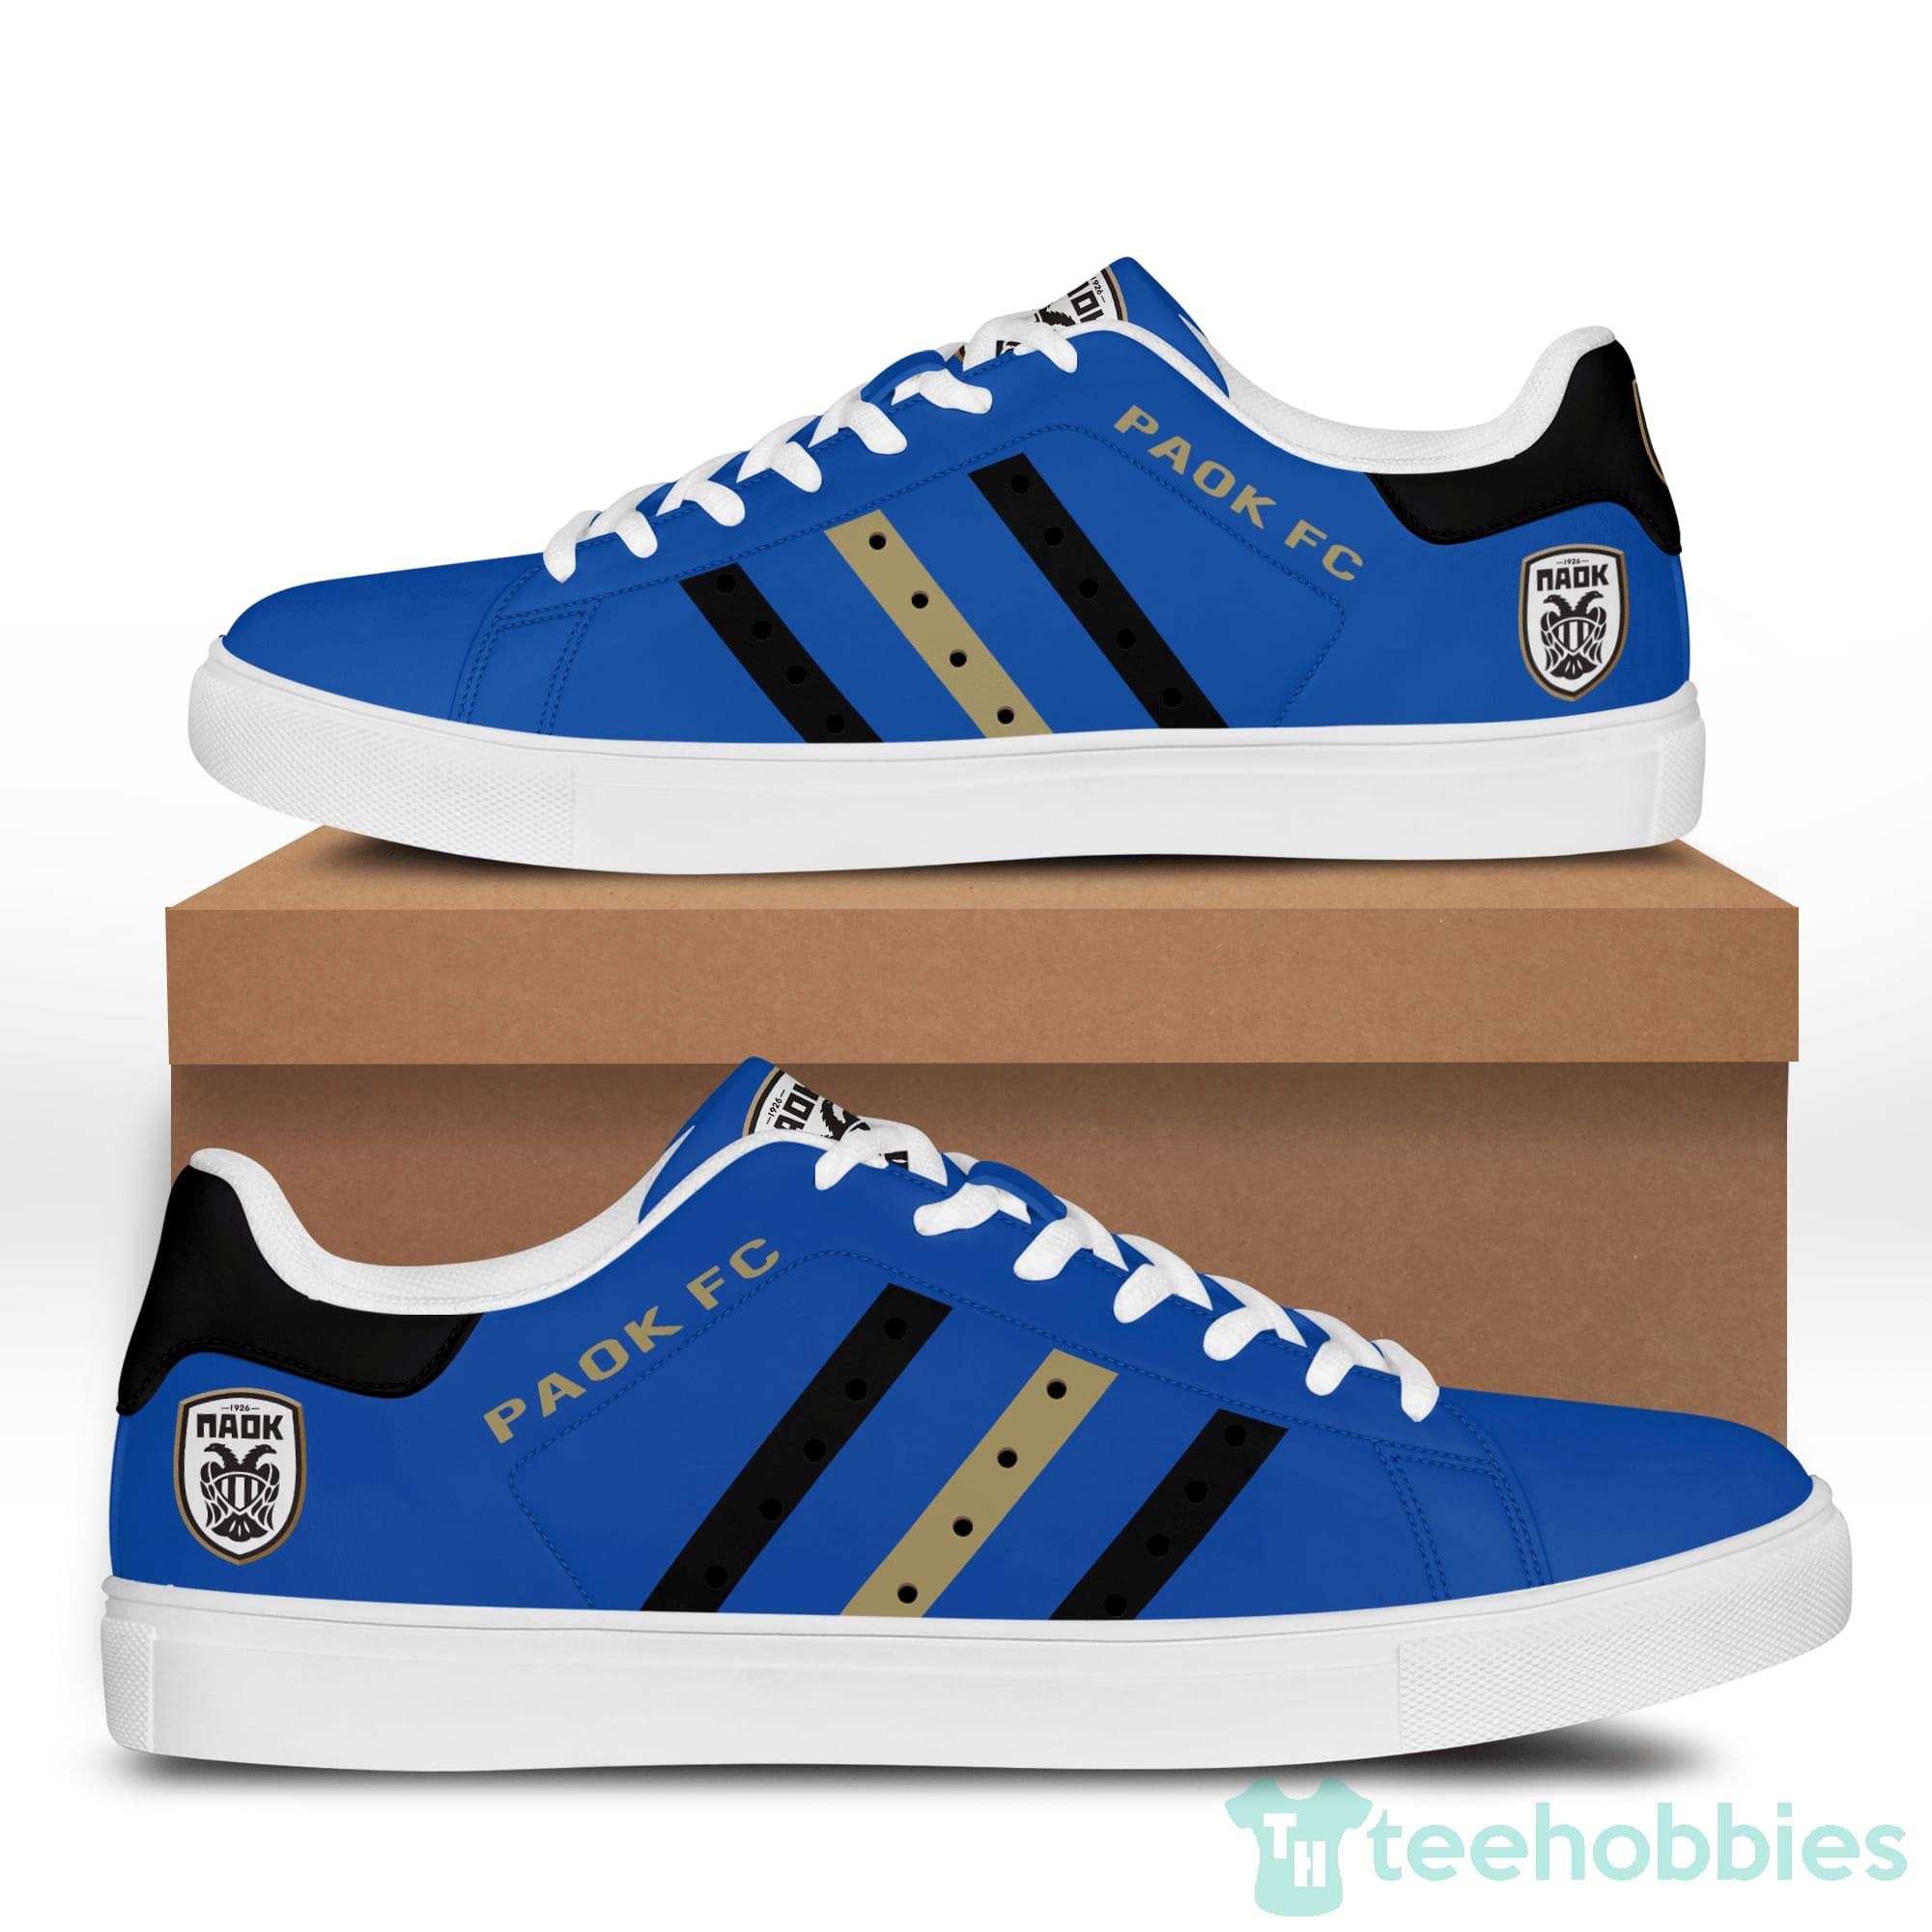 Paok Fc Blue Low Top Skate Shoes